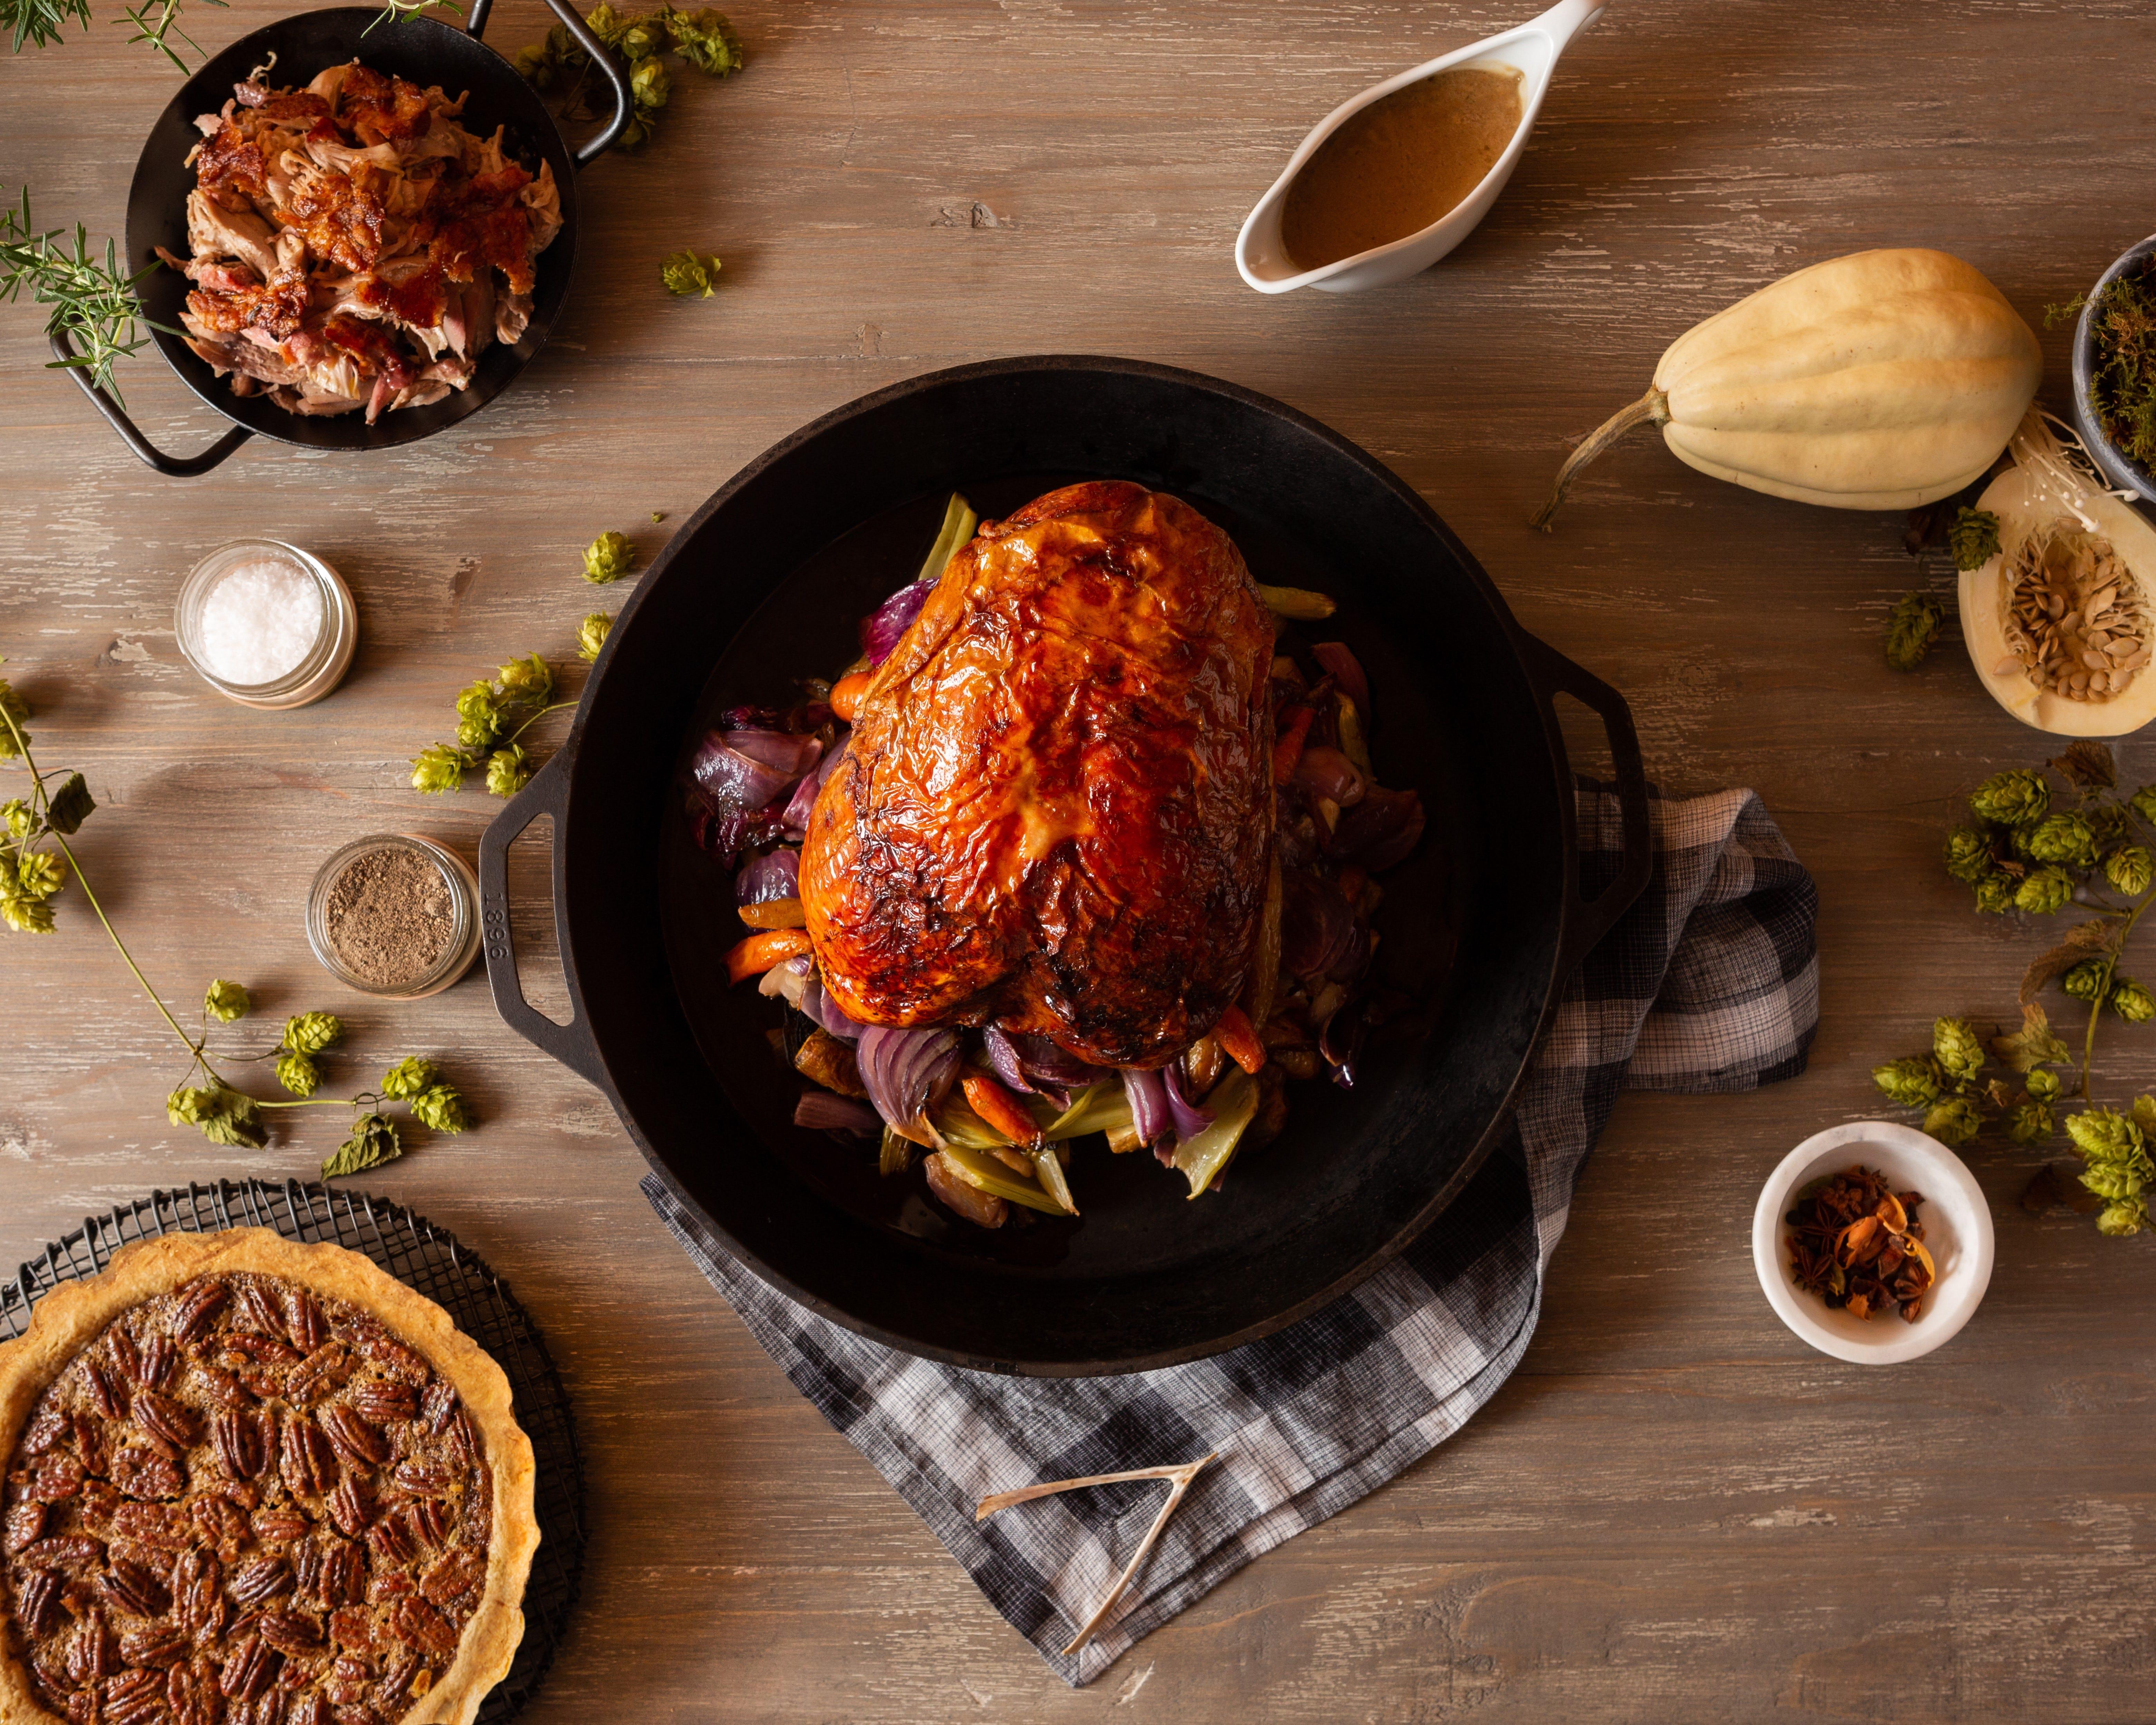 Whichever option you choose, a beautifully presented turkey is the star of the Thanksgiving feast.